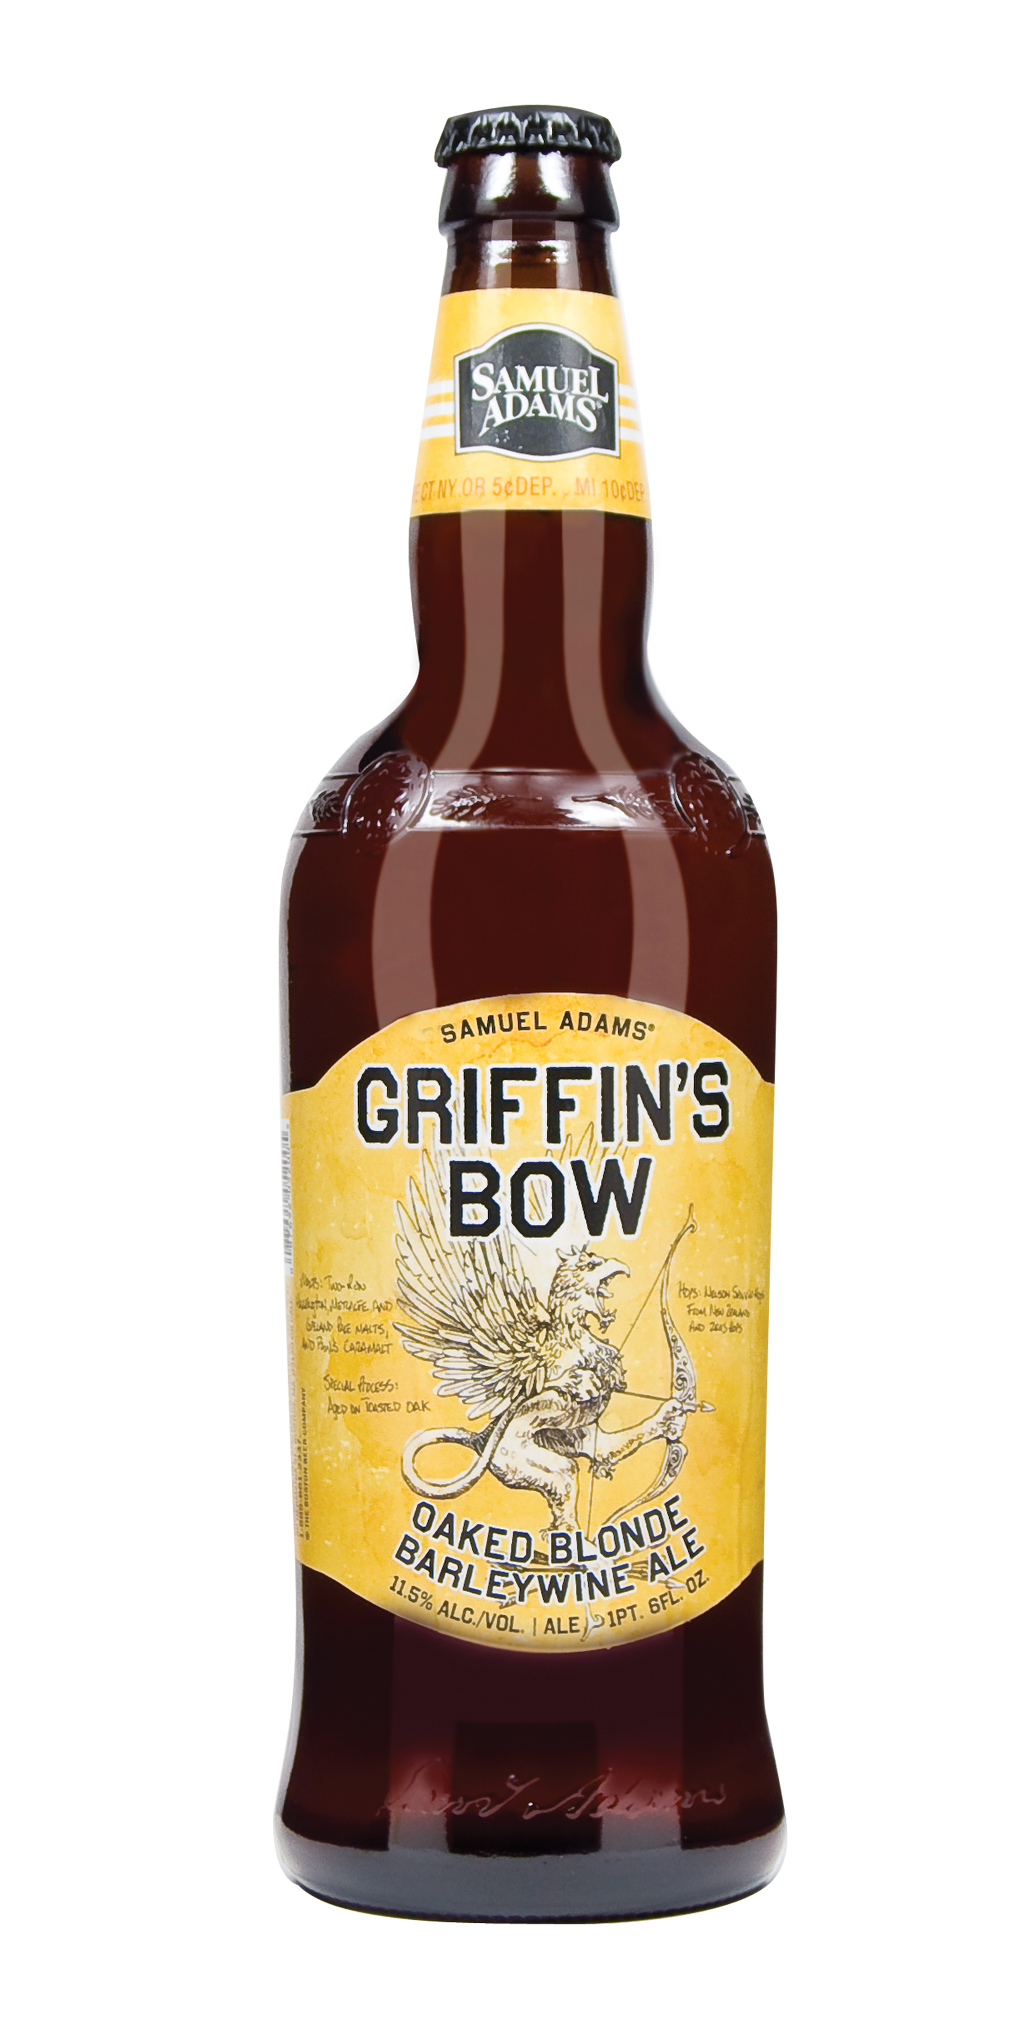 Samuel Adams Griffin's Bow, The Boston Beer Company